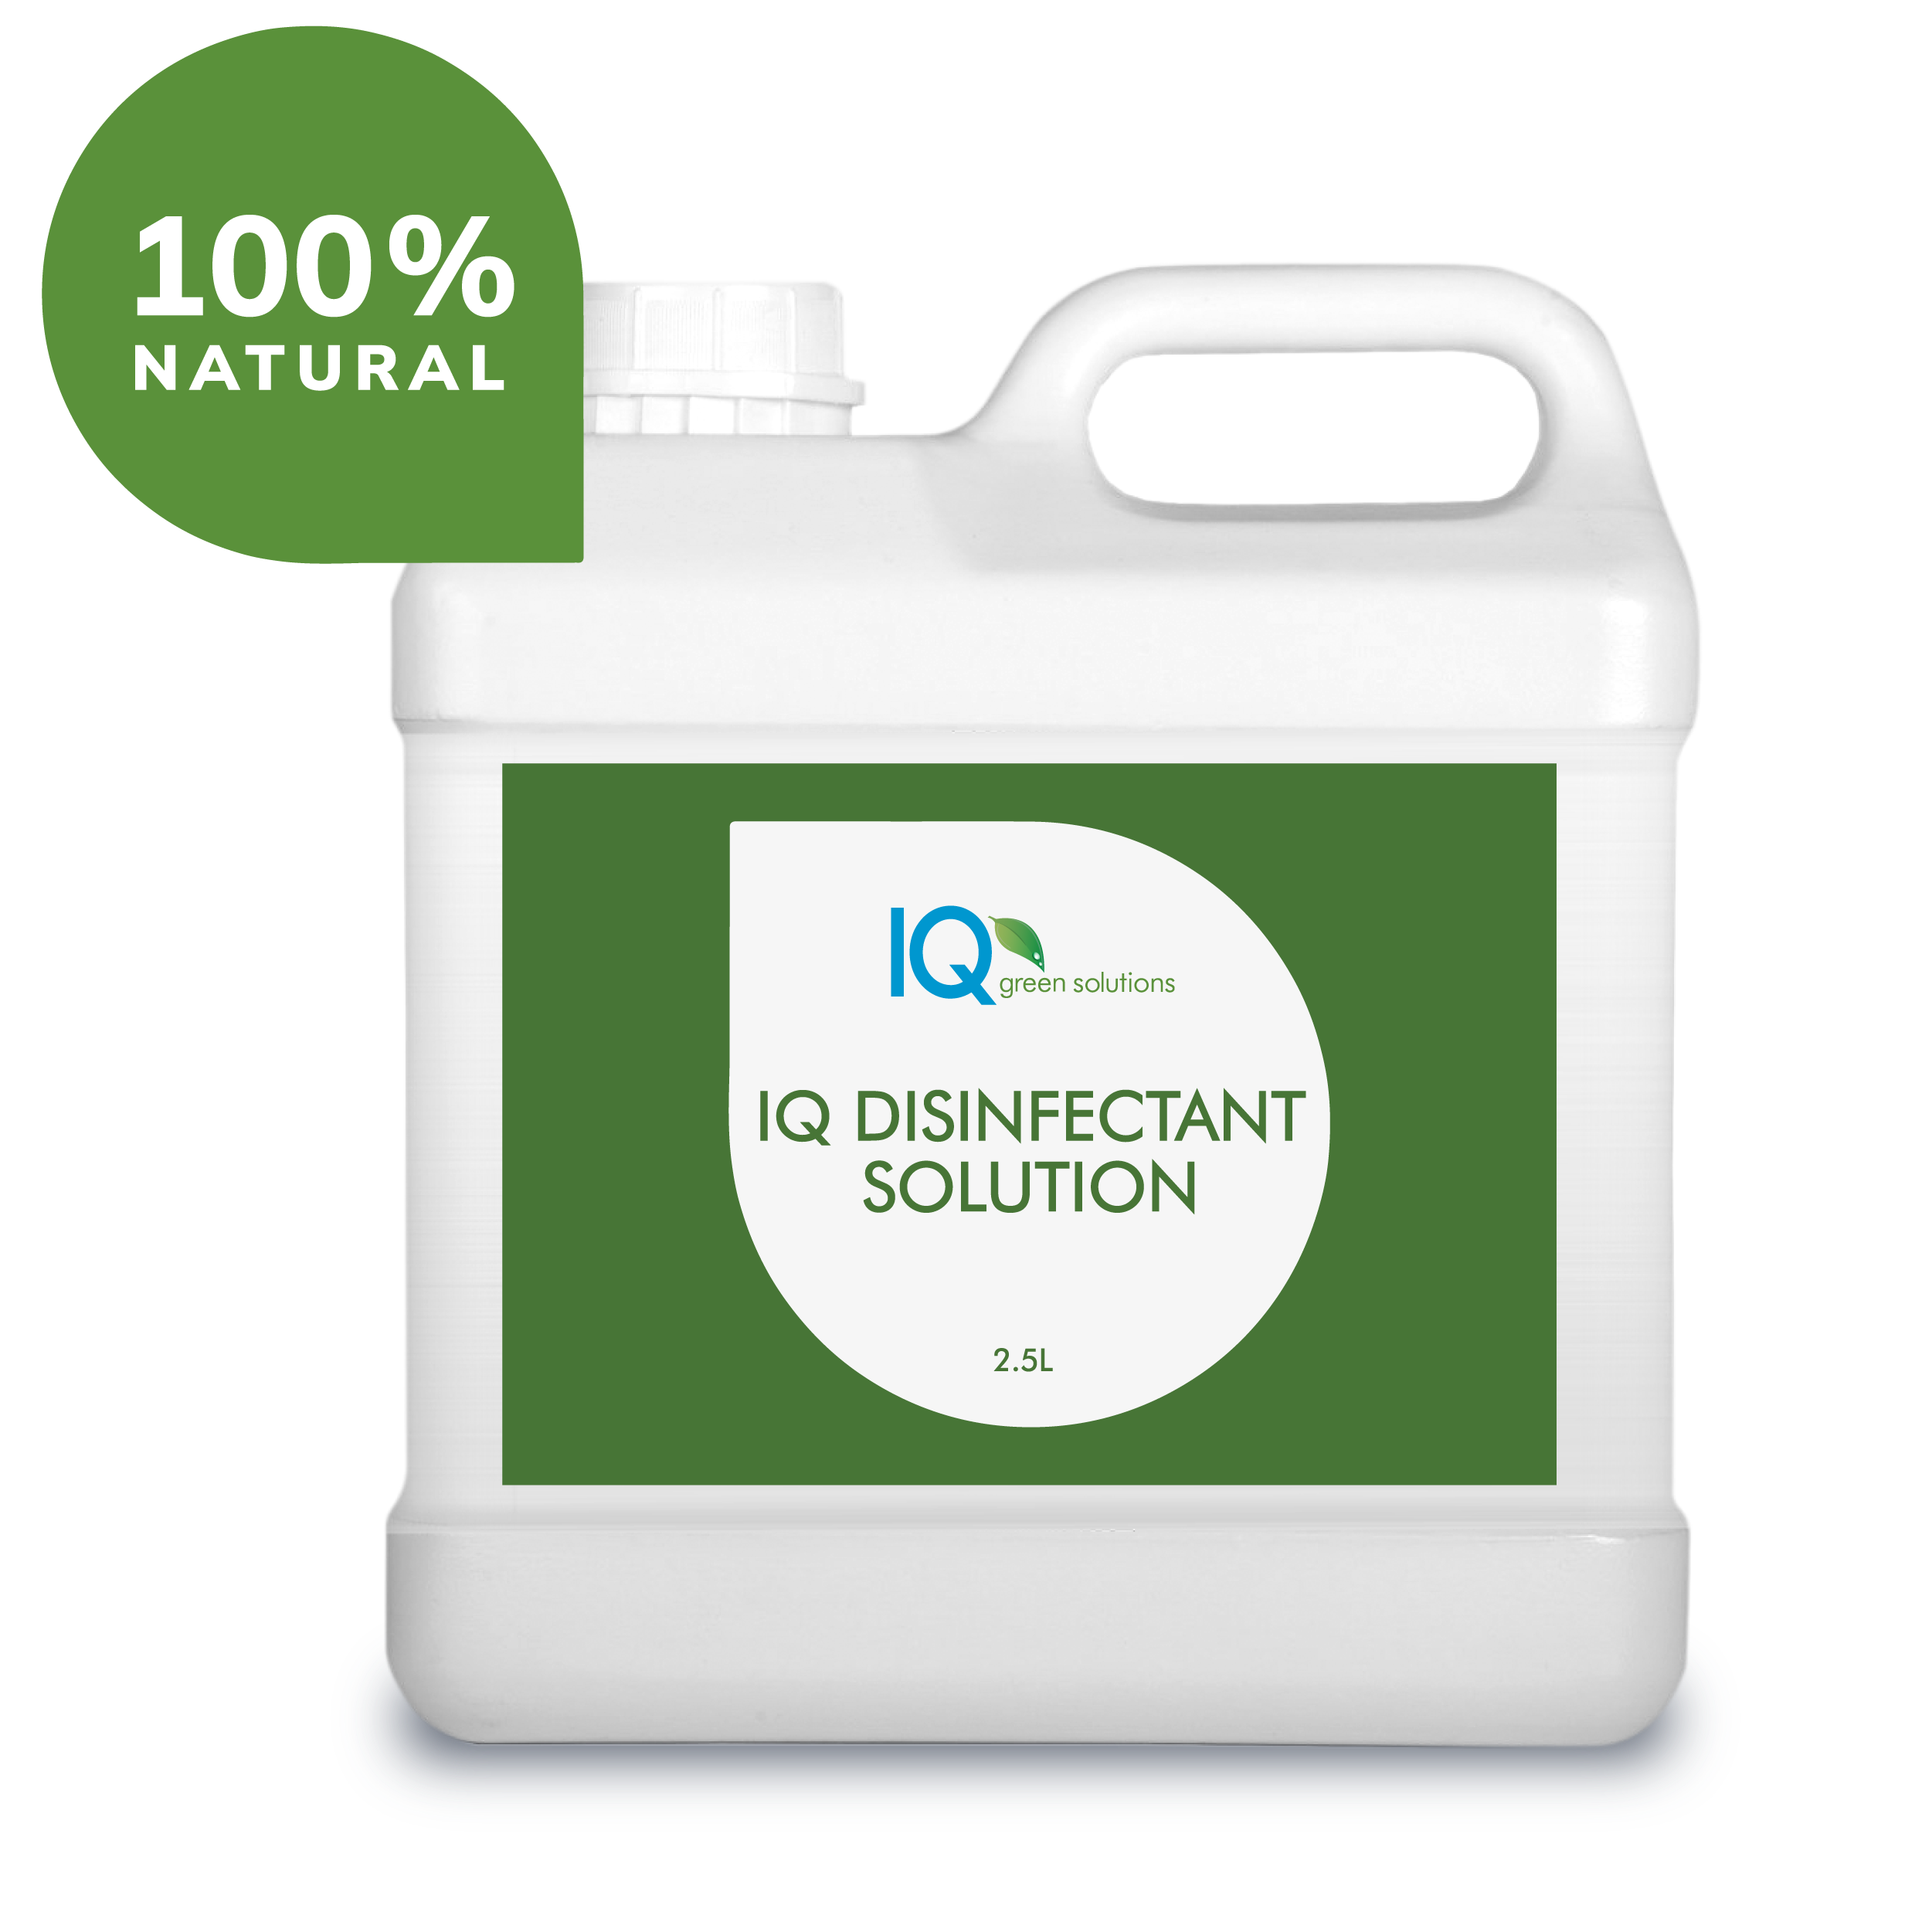 IQ Green Solutions web image - products-IQ Disinfectant